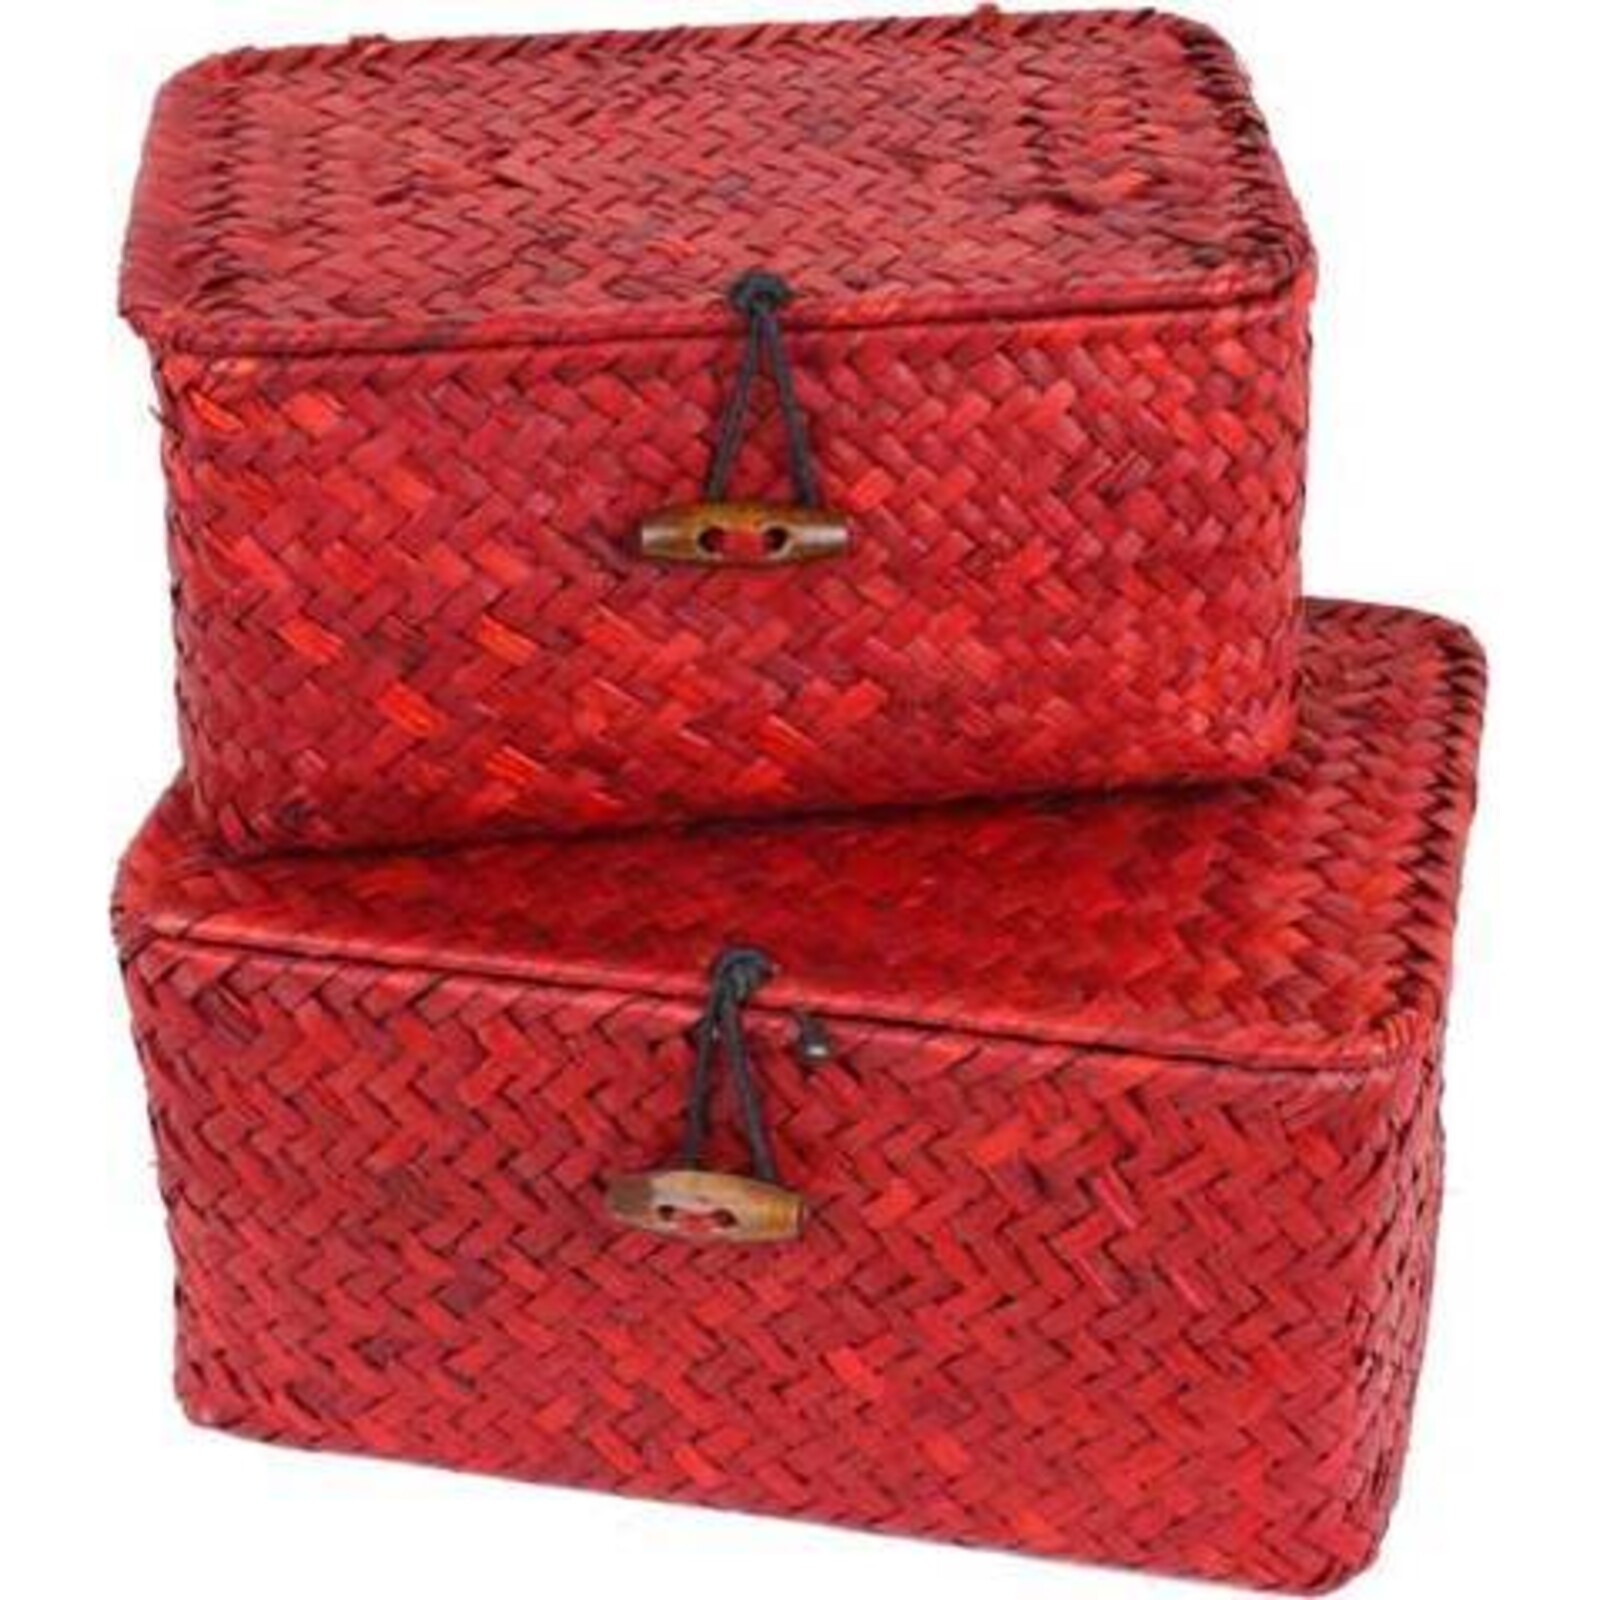 Woven Box Small Red S/2